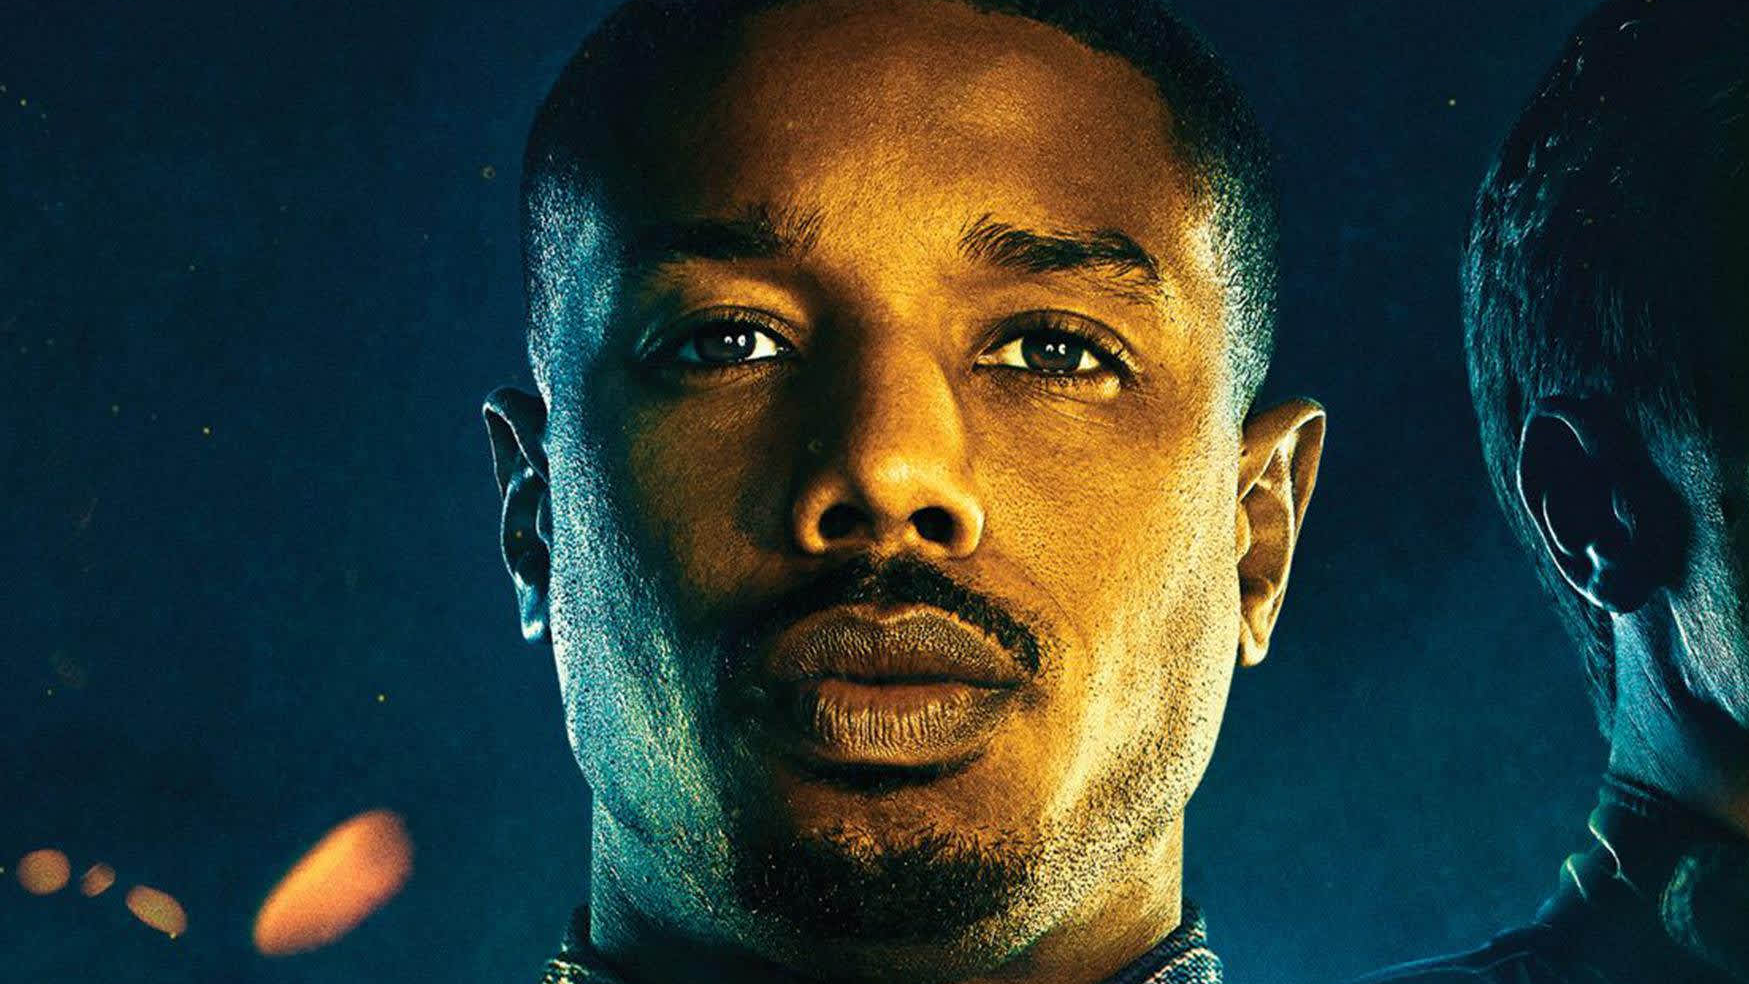 Creed actor Michael B. Jordan suits up as Val-Zod in stunning image